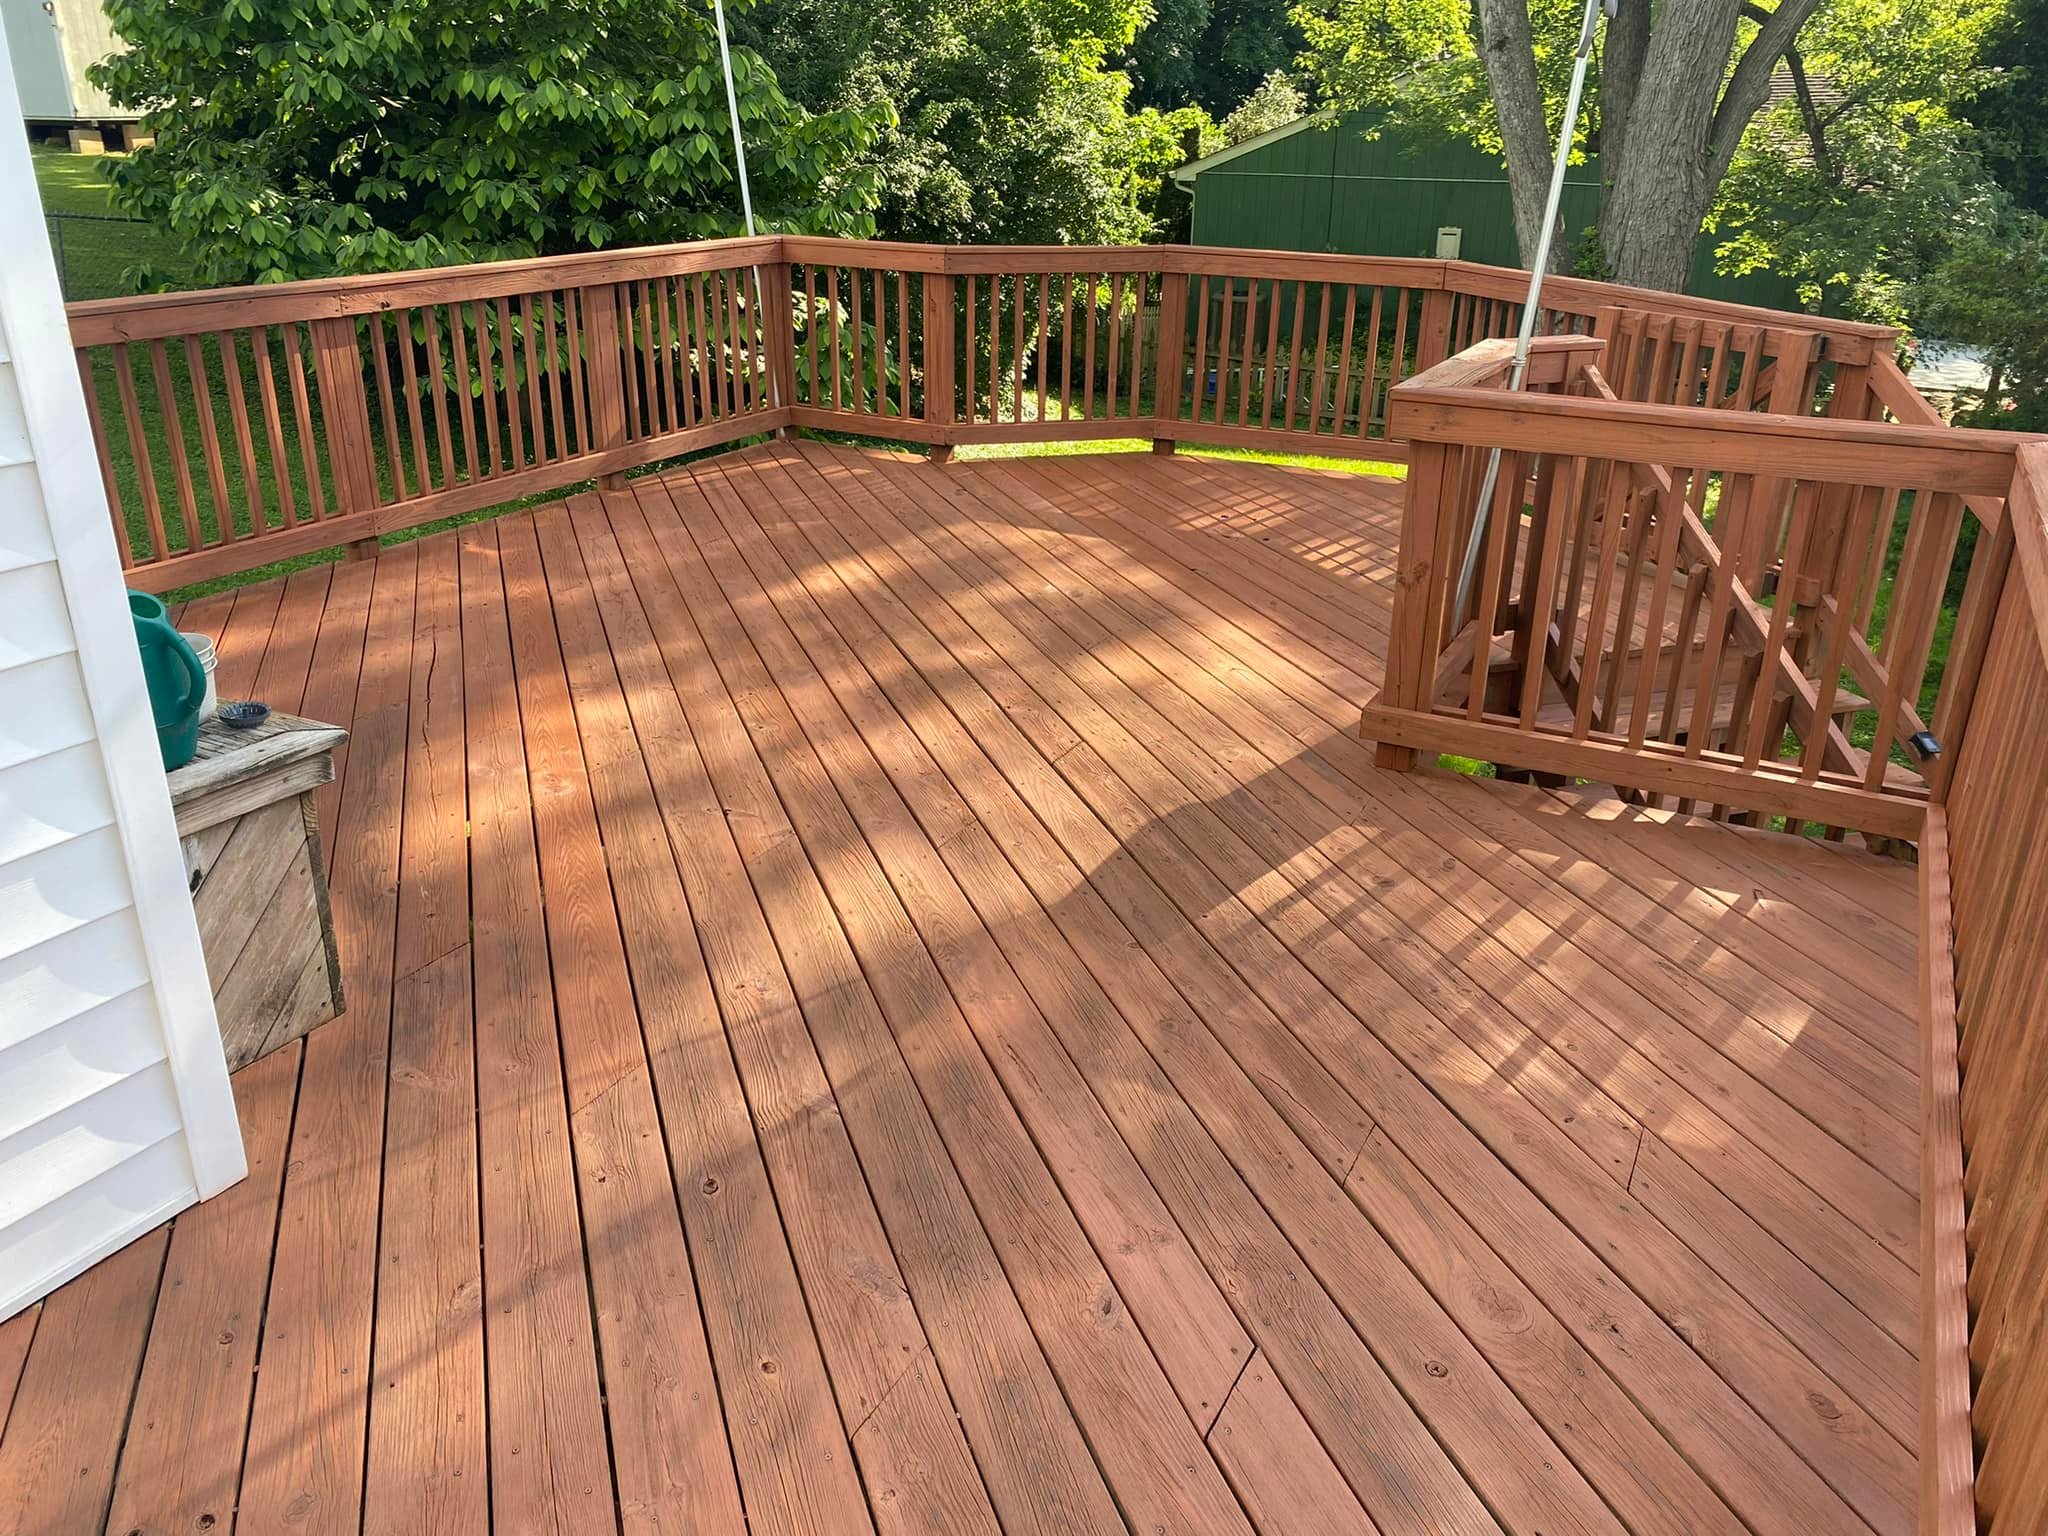 Deck staining services